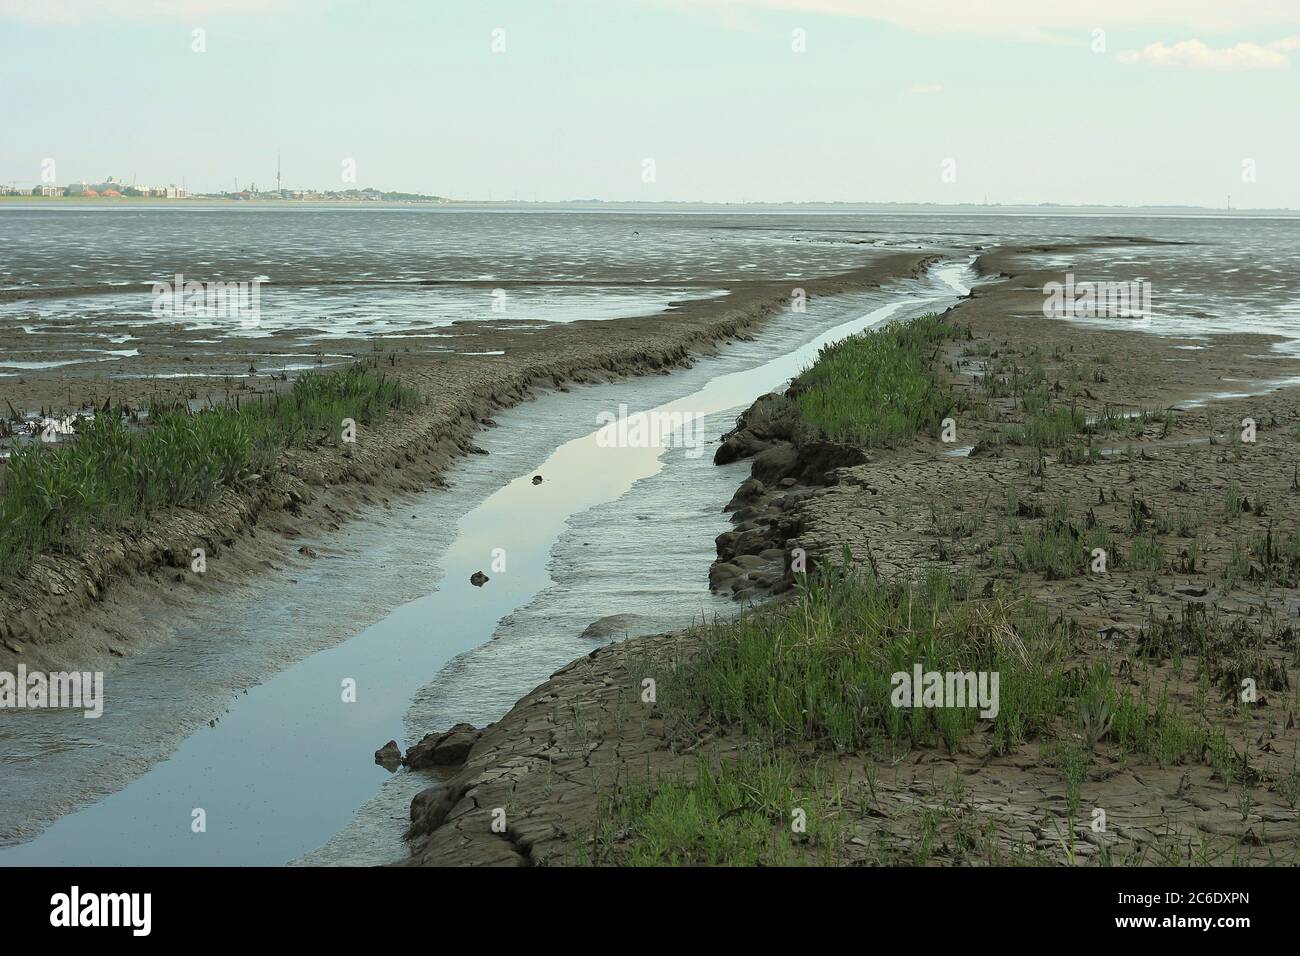 Tidal creek during low tide in the Wadden Sea near Cäciliengroden, Jadebusen, Germany. Stock Photo